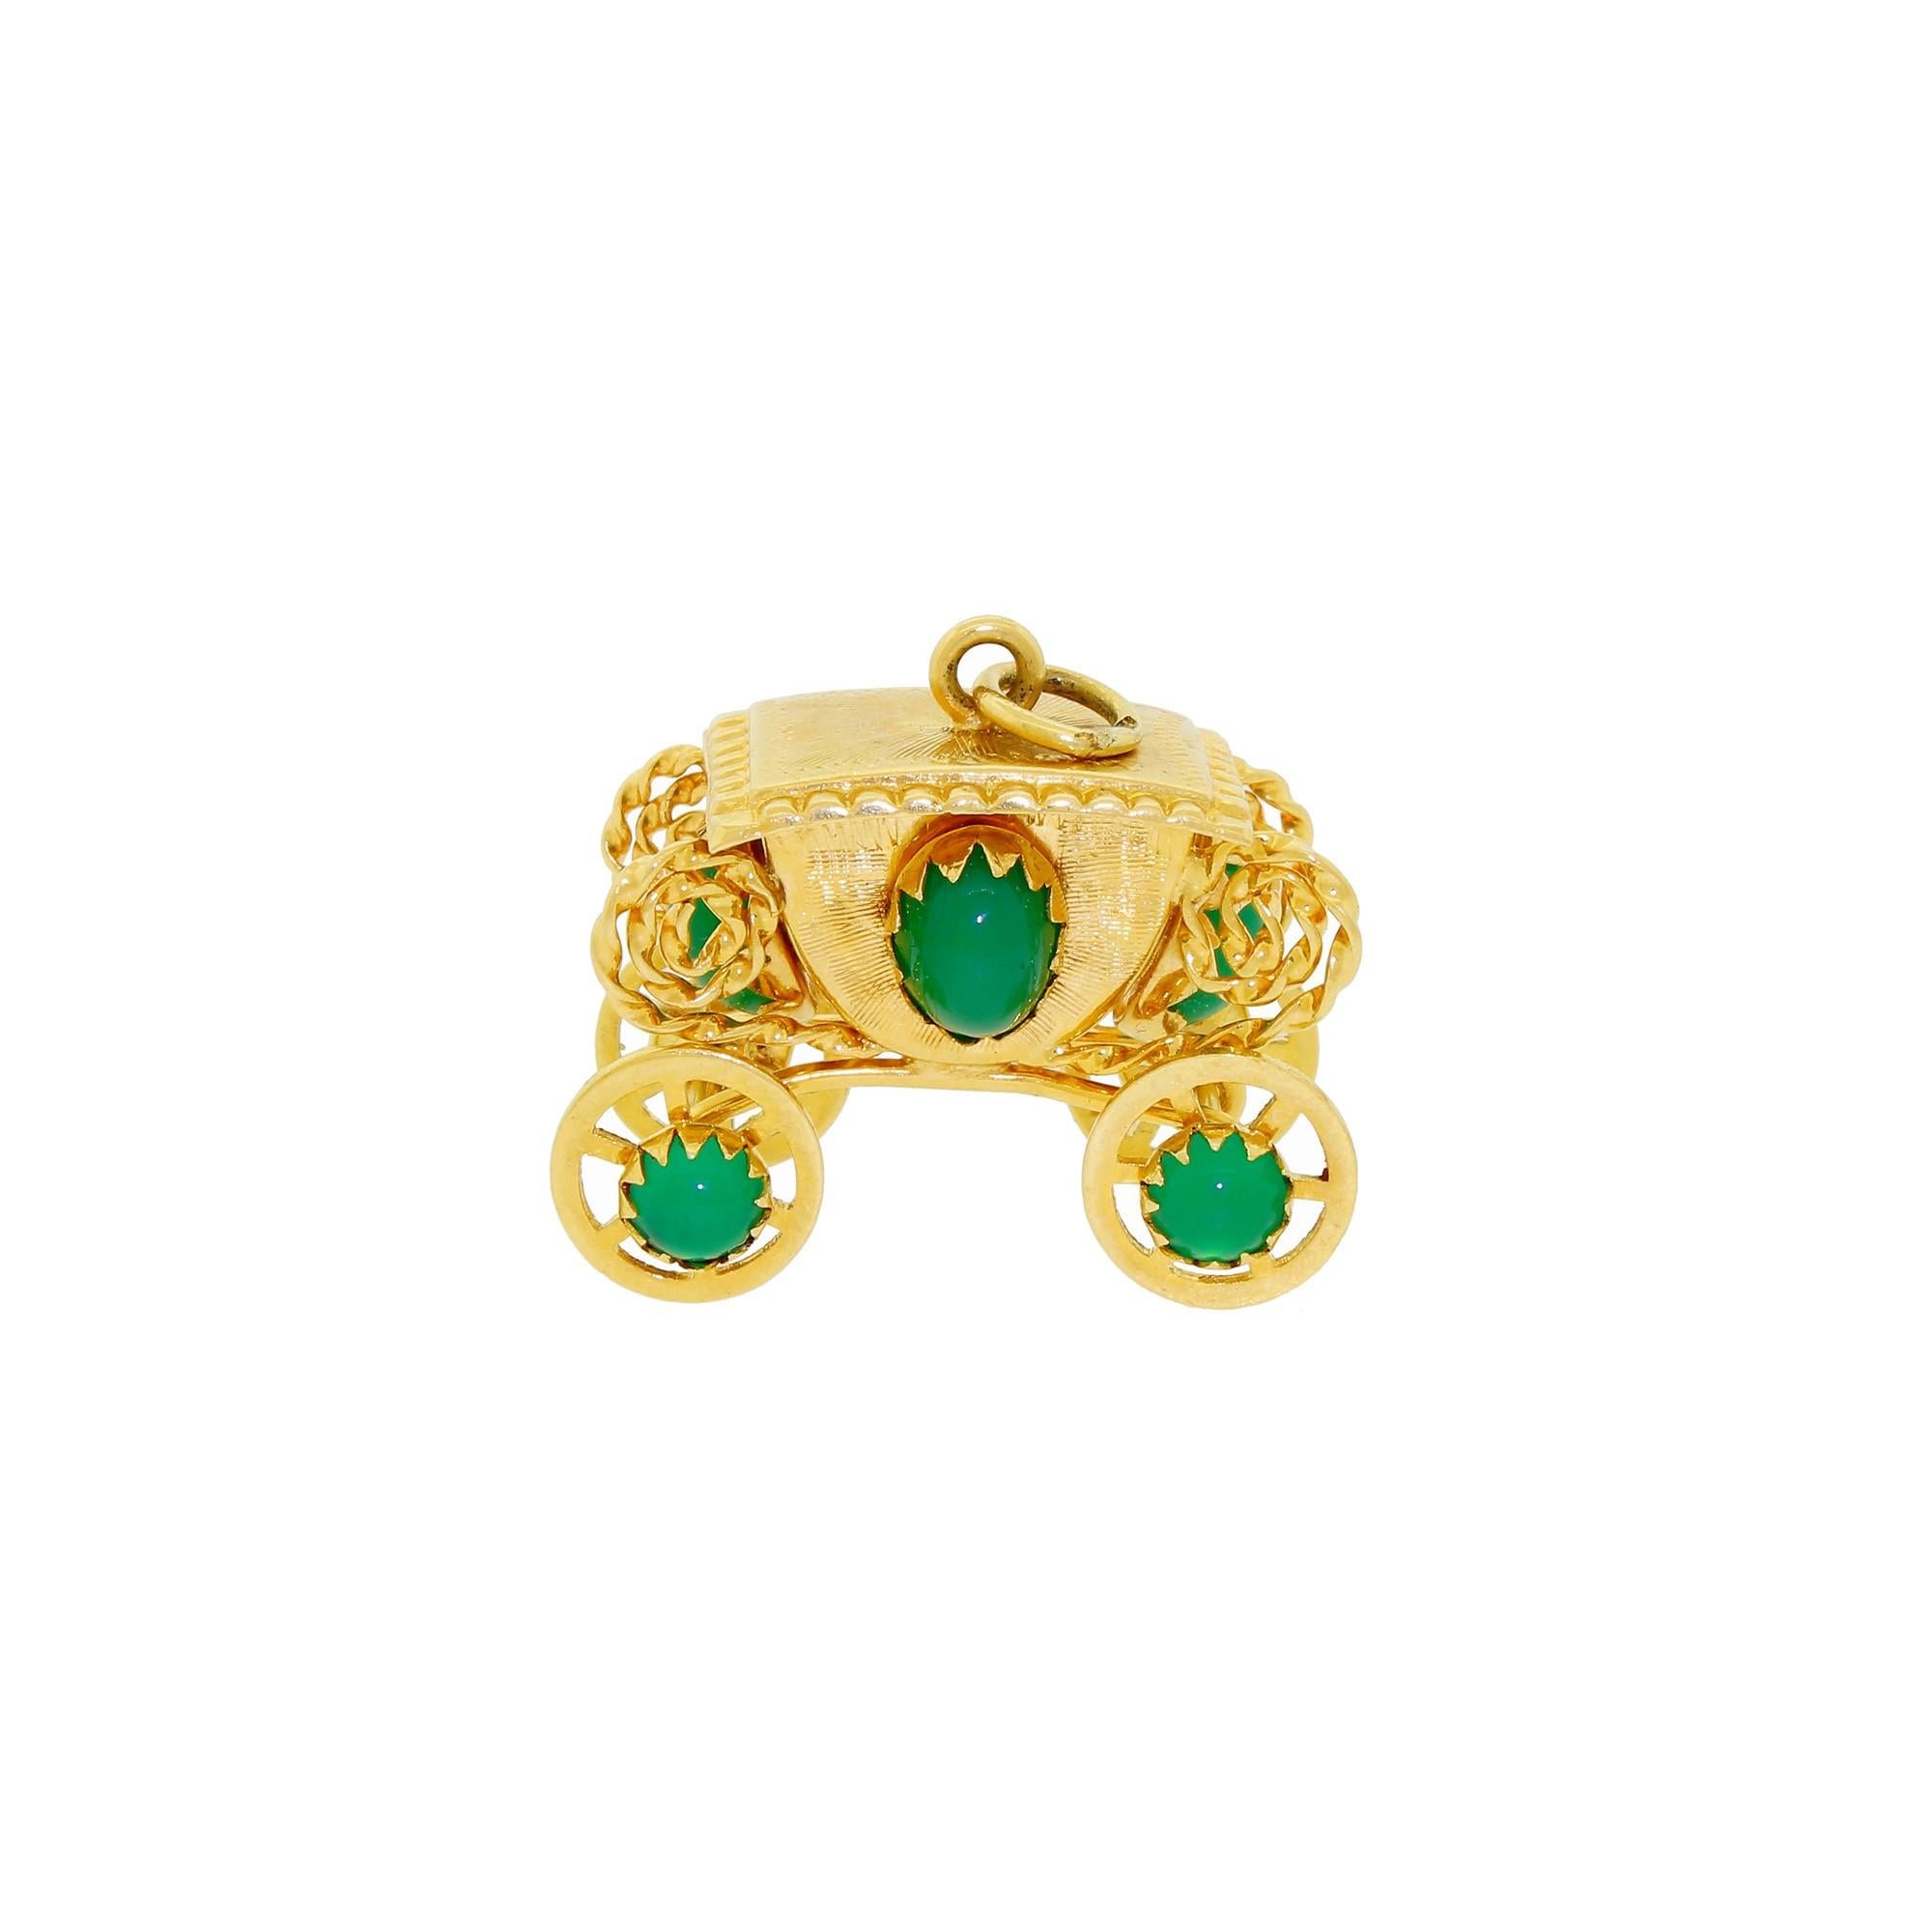 This remarkable 18K gold carriage features eight green art glass beads and mechanical wheels that spin freely. This piece is substantial enough to be worn as a pendant, or utilized as the large end accent piece for a charm bracelet. It is